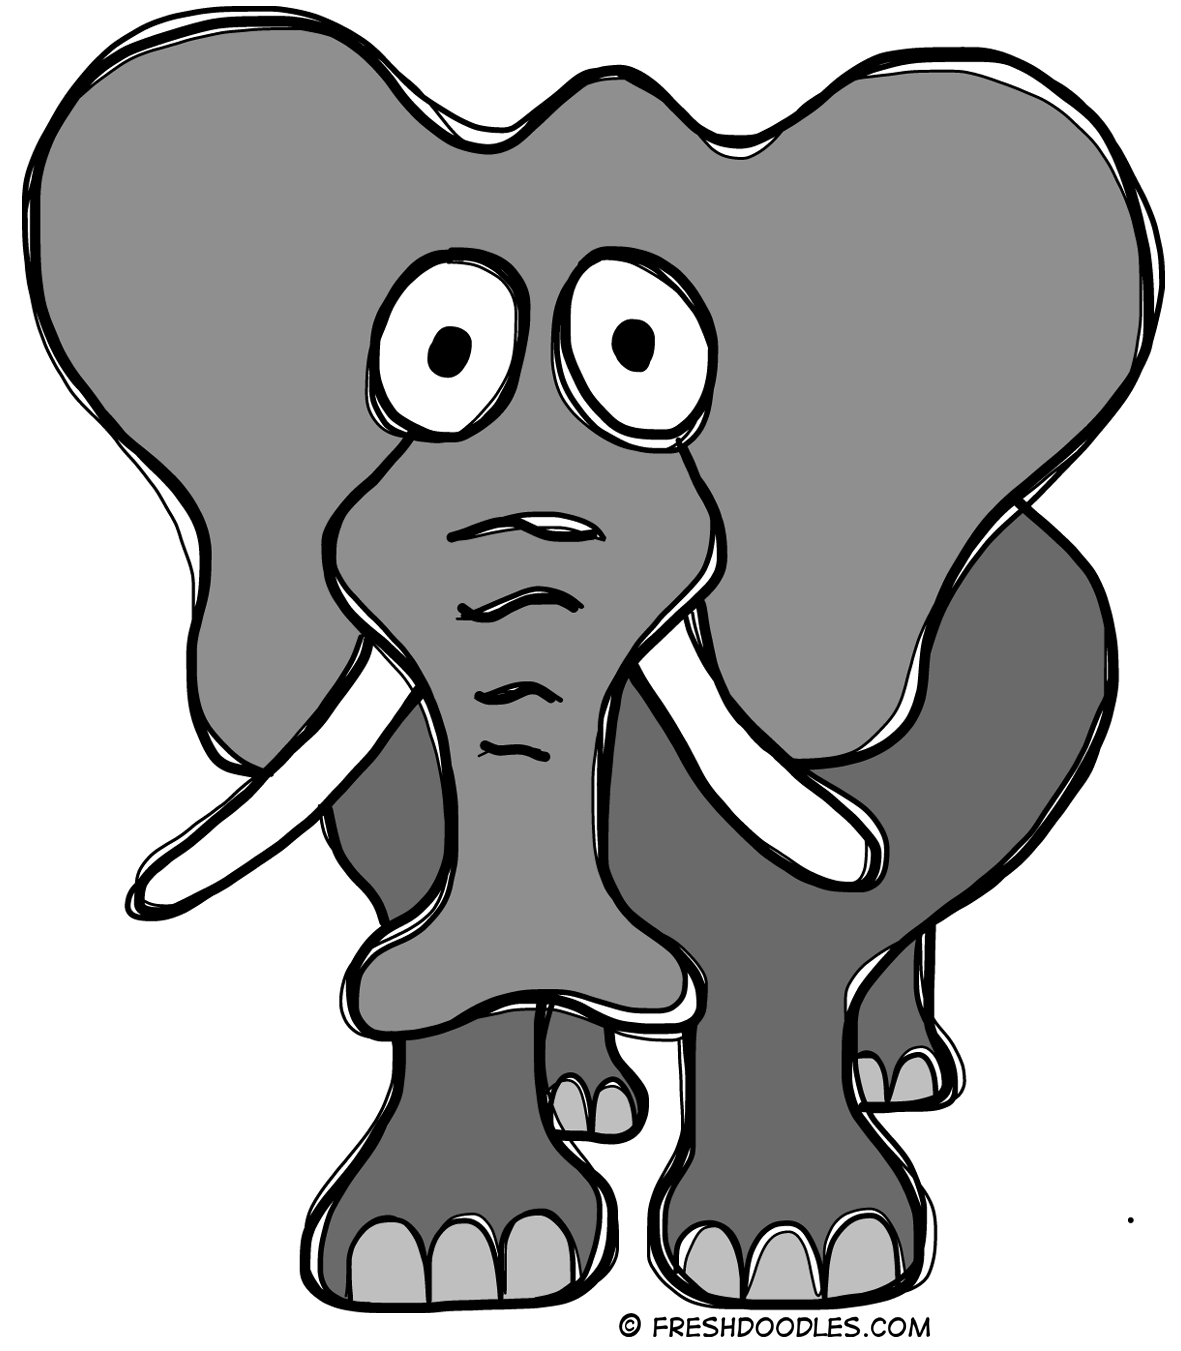 Fresh Doodles - Free Printable Posters For Kids: Elephant Clip Art